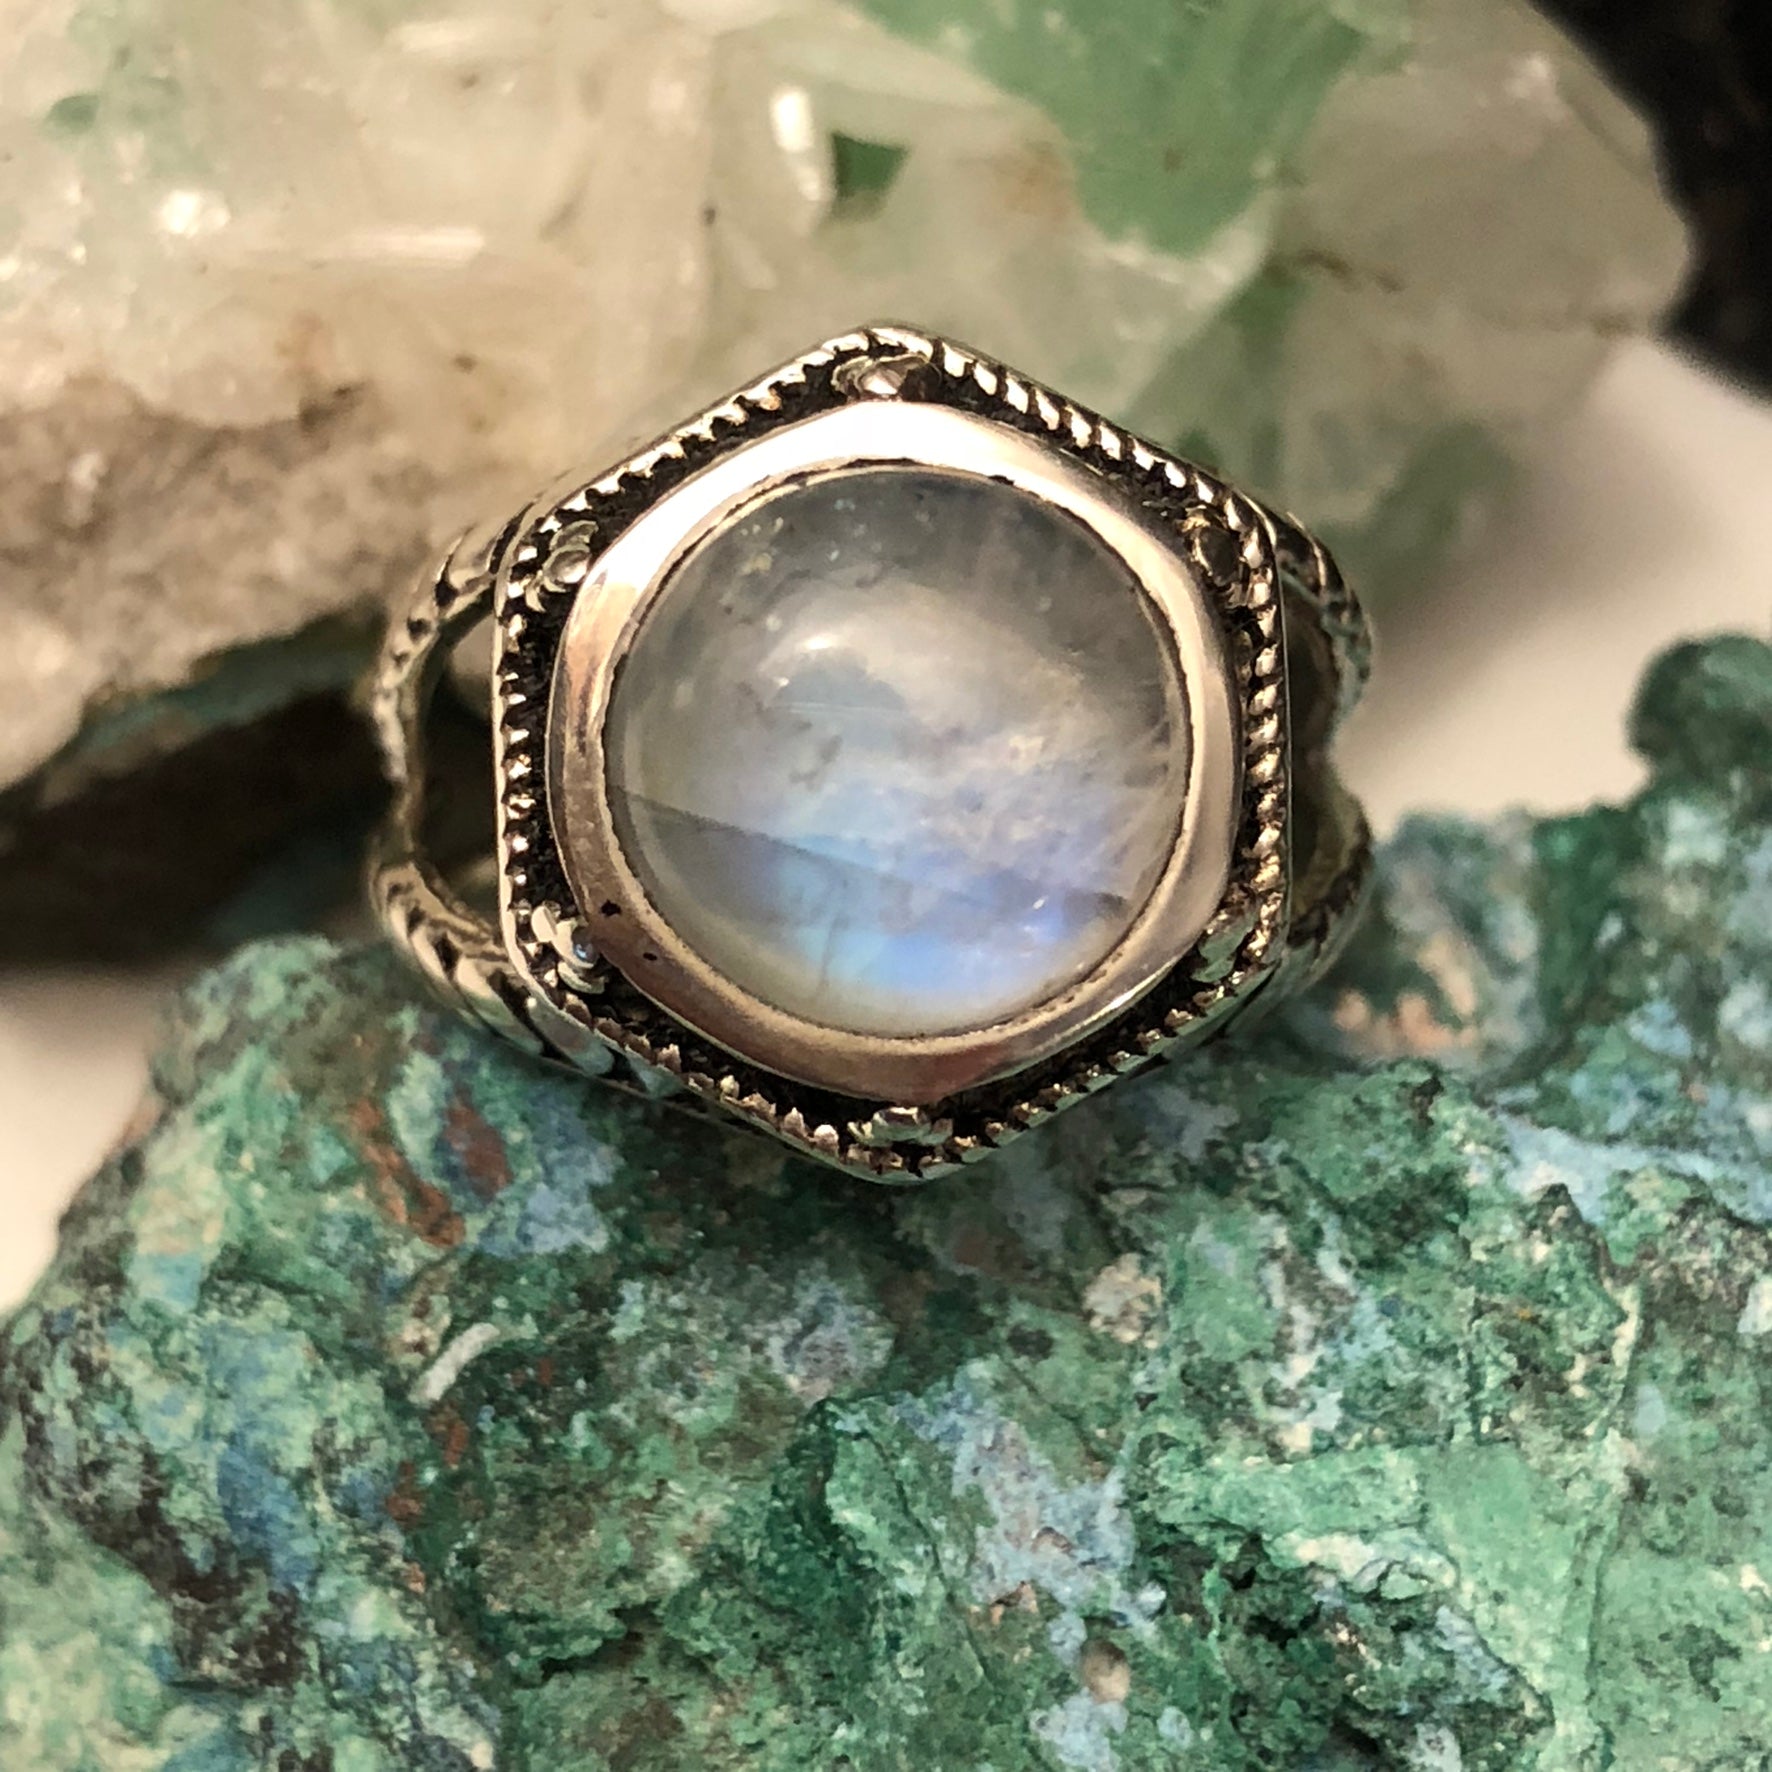 Rainbow Moonstone Ring | Made In Earth